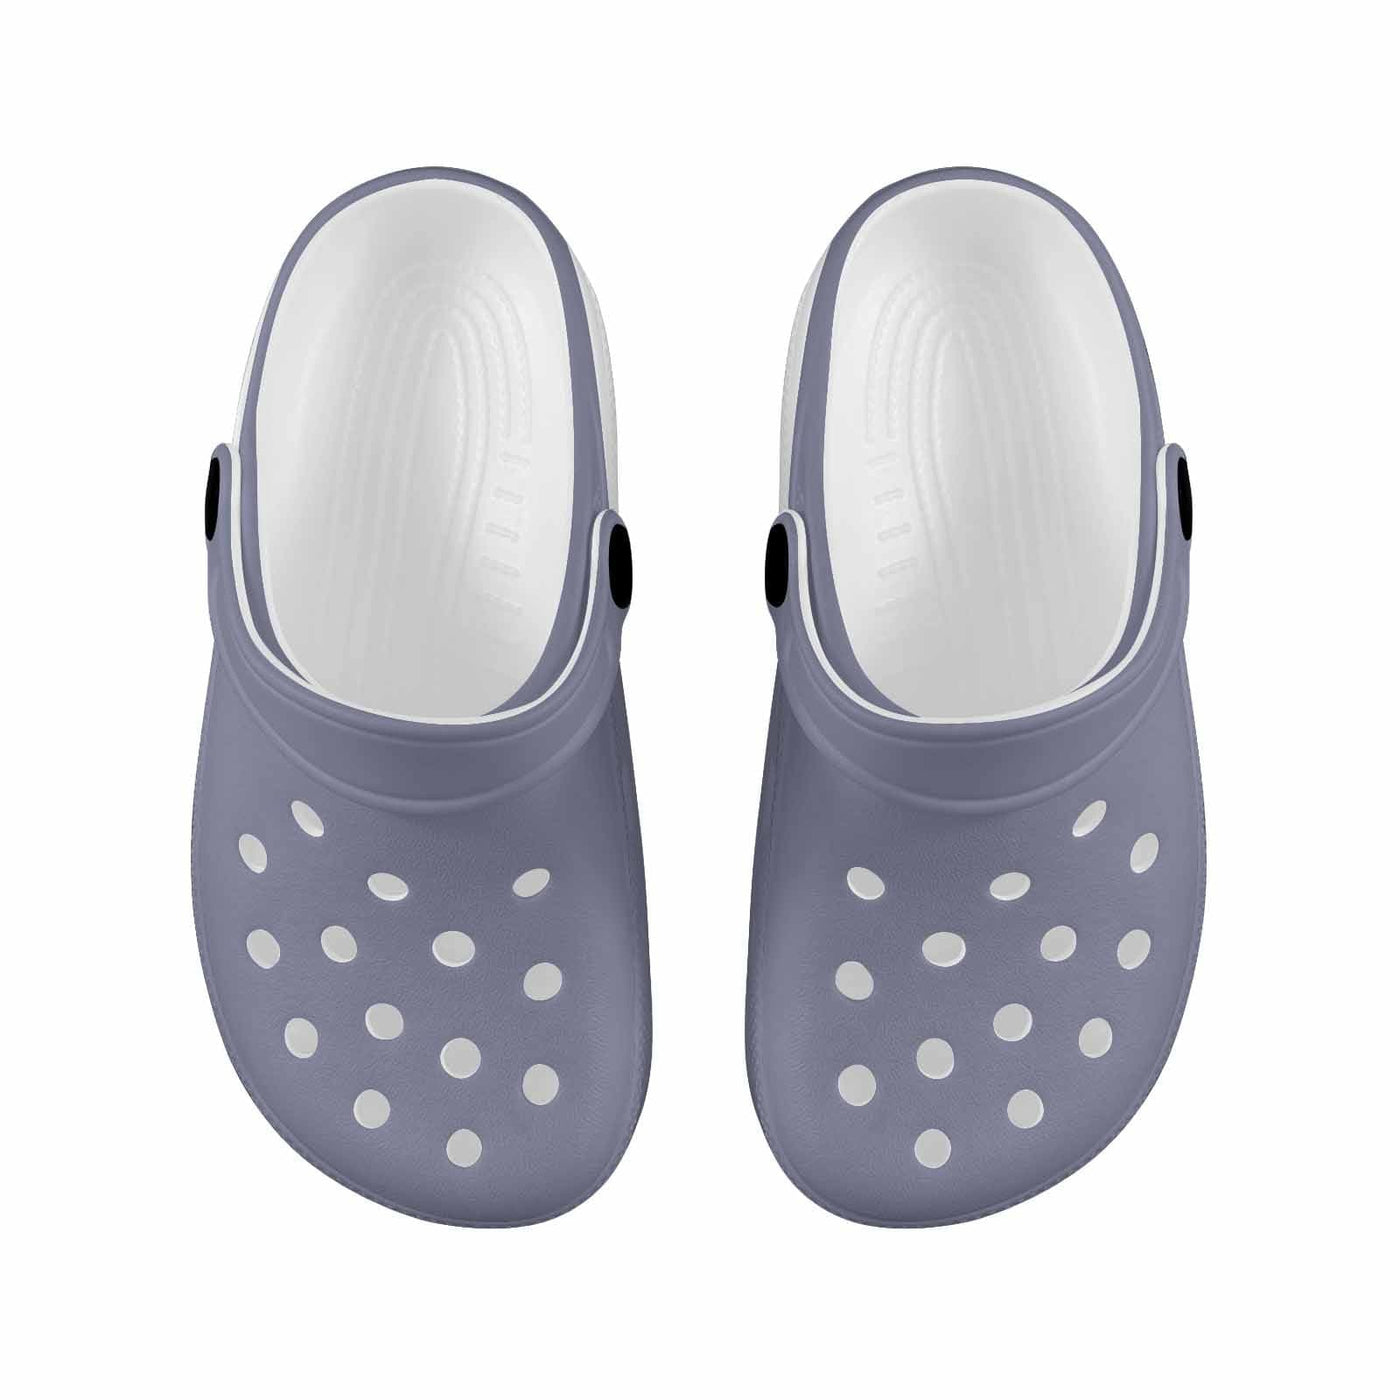 Cool Grey Clogs For Youth - Unisex / Clogs / Youth